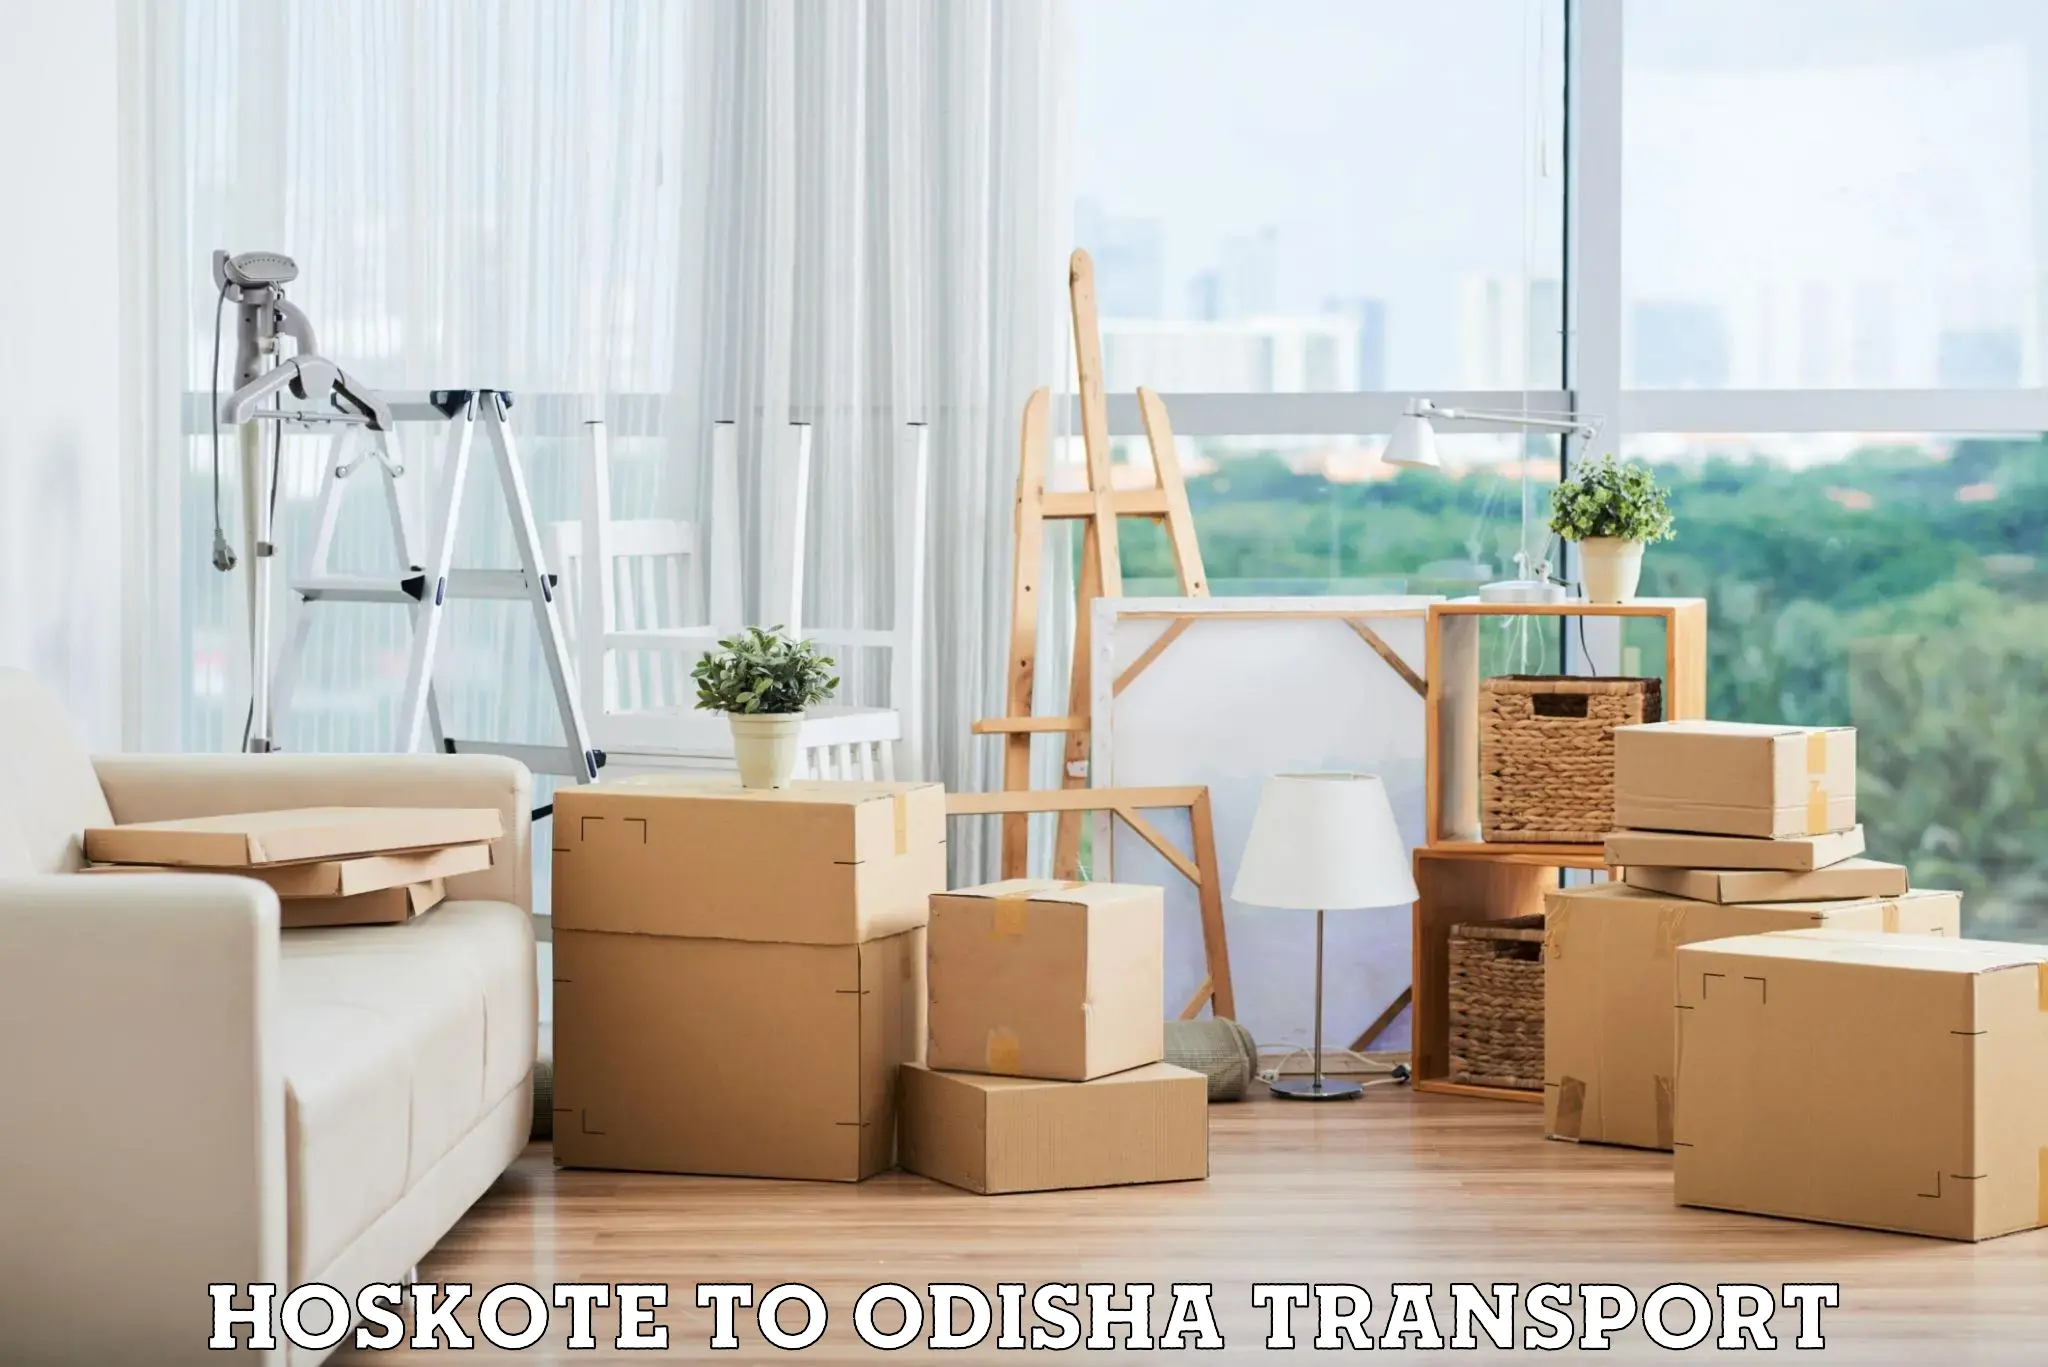 Air freight transport services Hoskote to Chandikhol